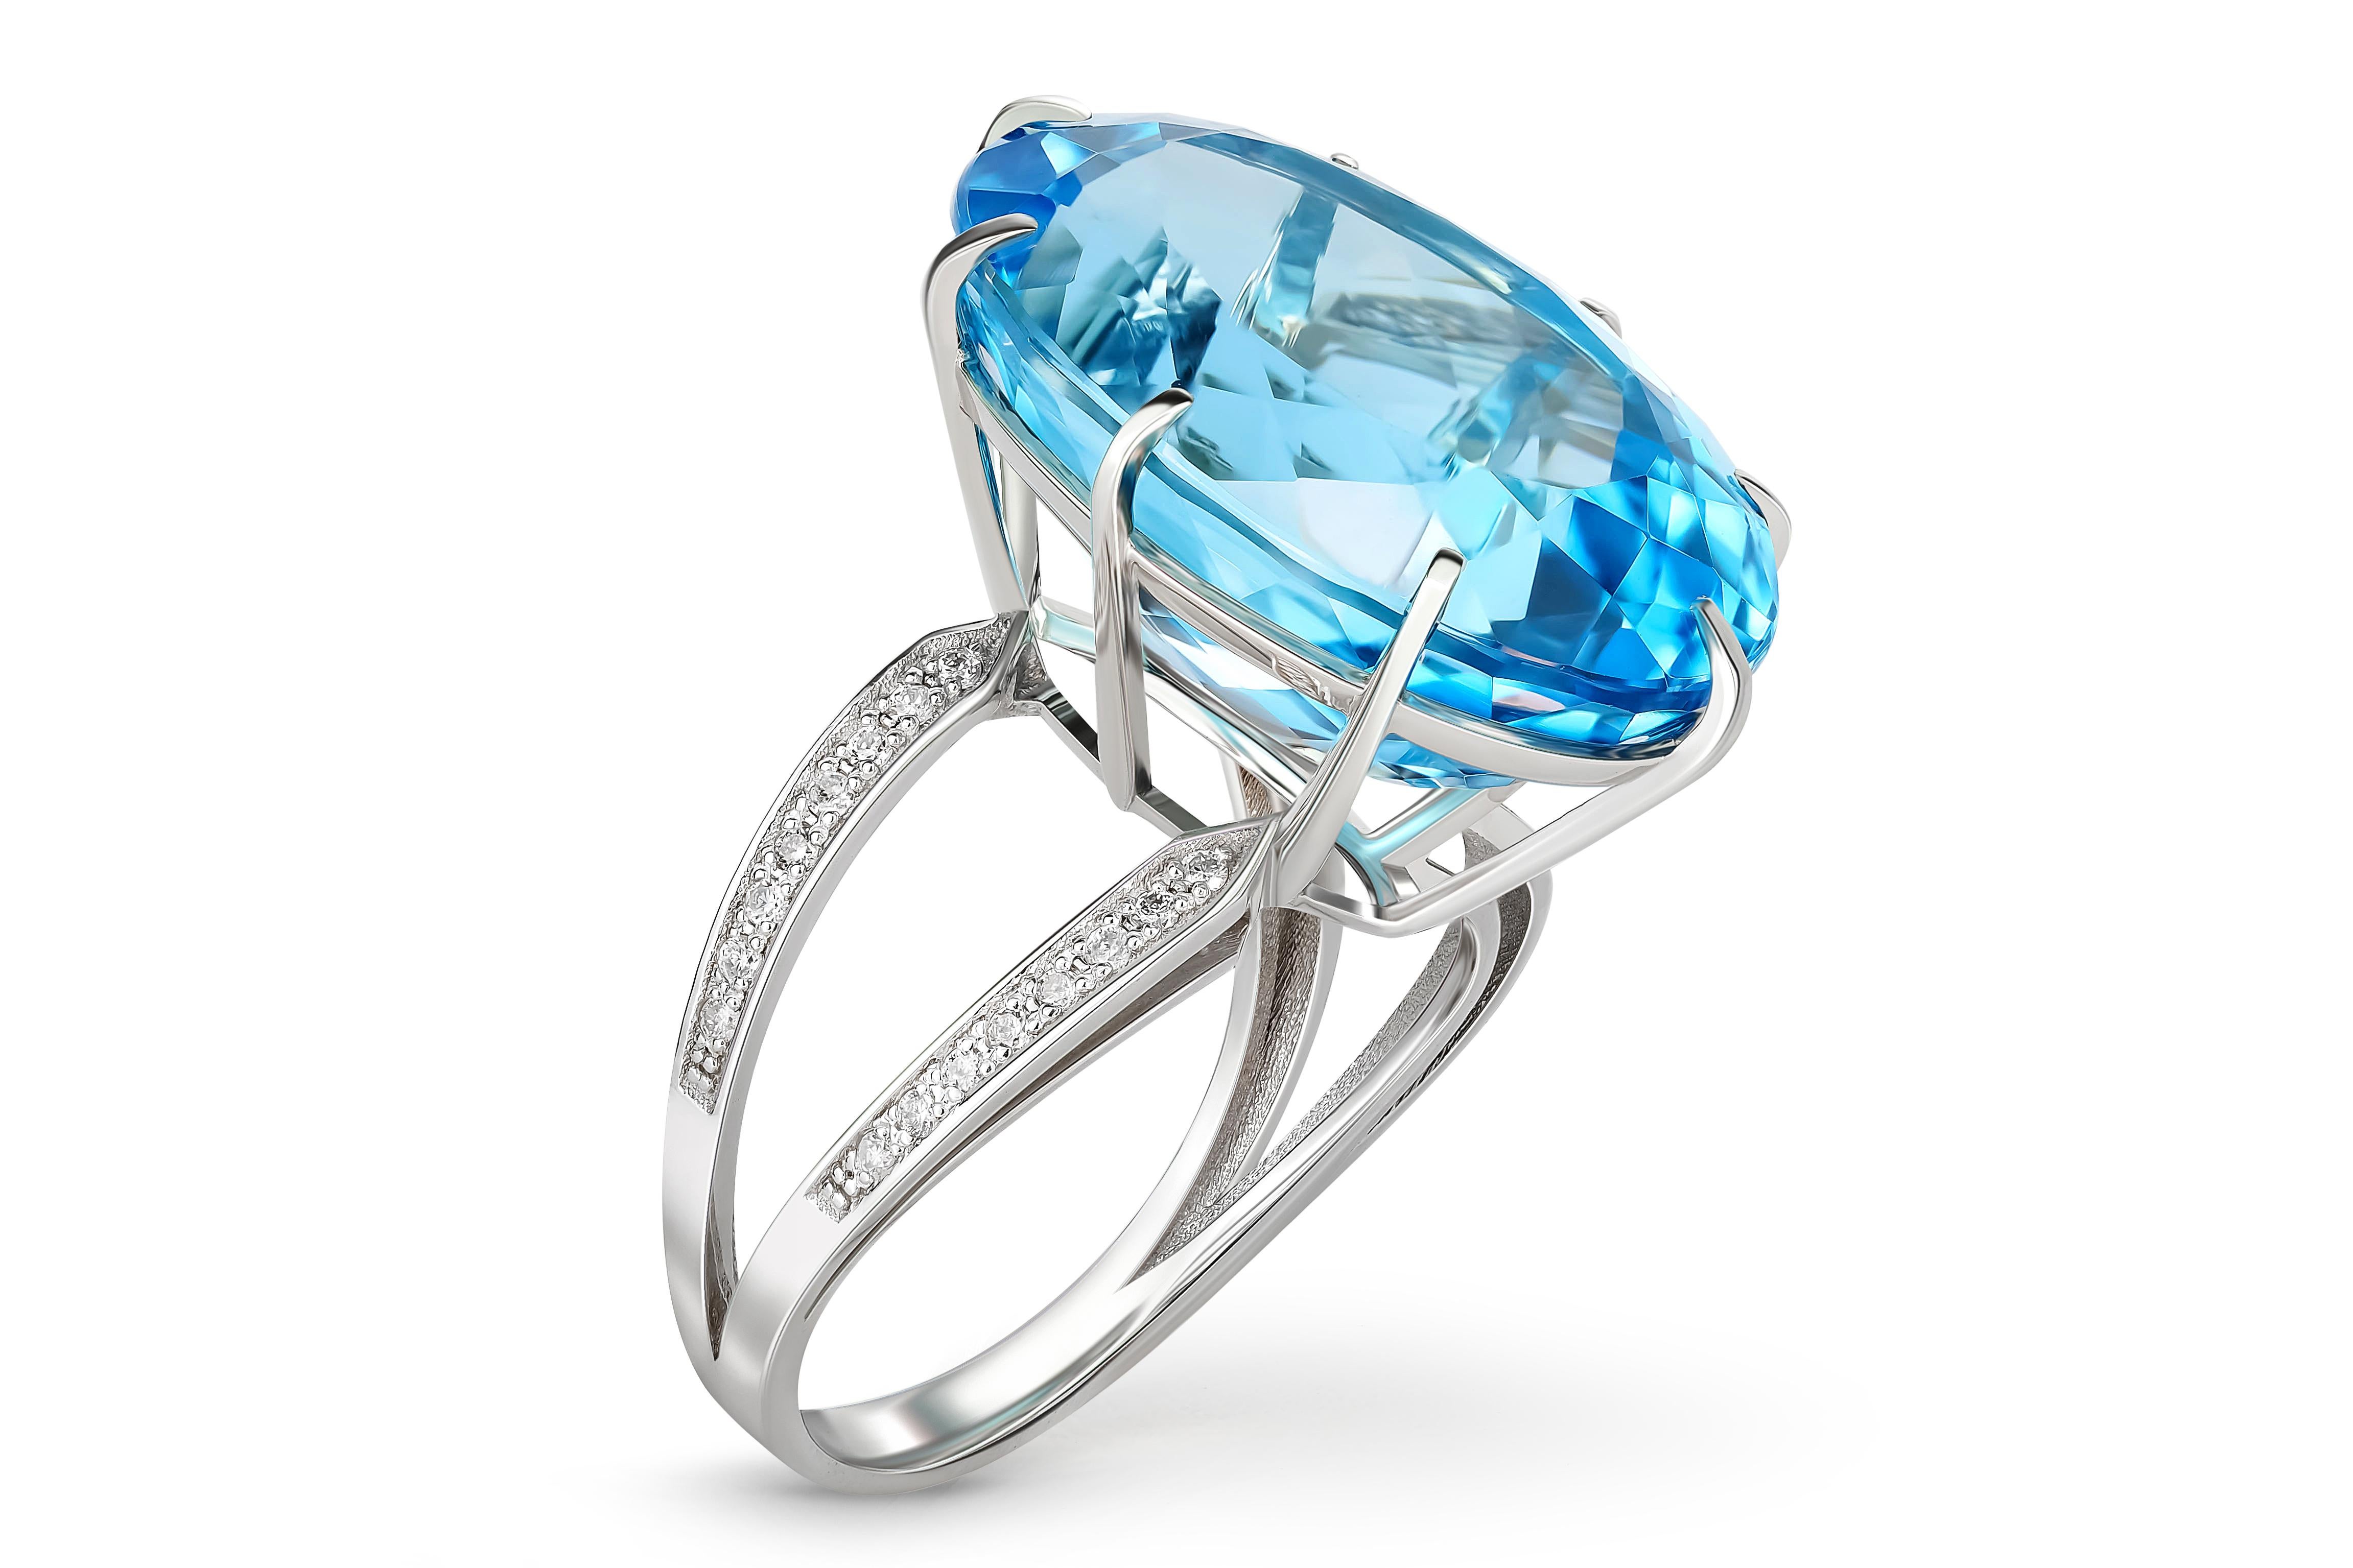 Oval Cut 14 Karat Gold Ring with Oval Topaz and Diamonds, Gold Ring with Sky Blue Topaz For Sale